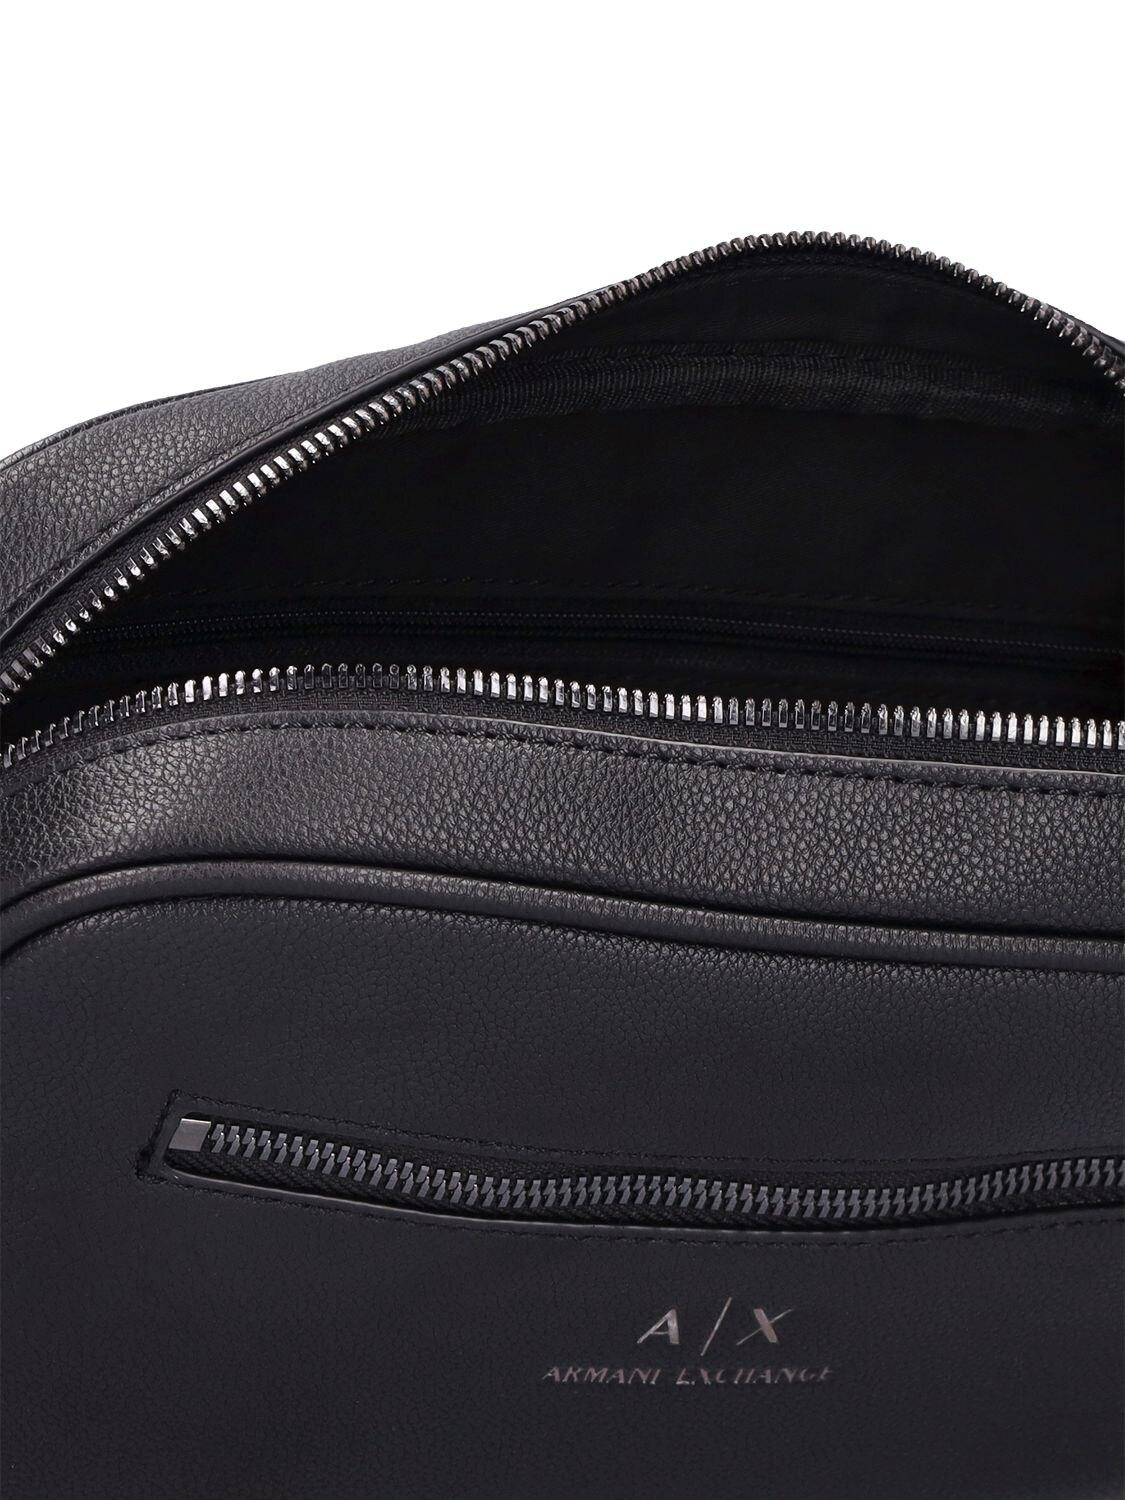 Armani Exchange Faux Leather Pouch in Black for Men | Lyst